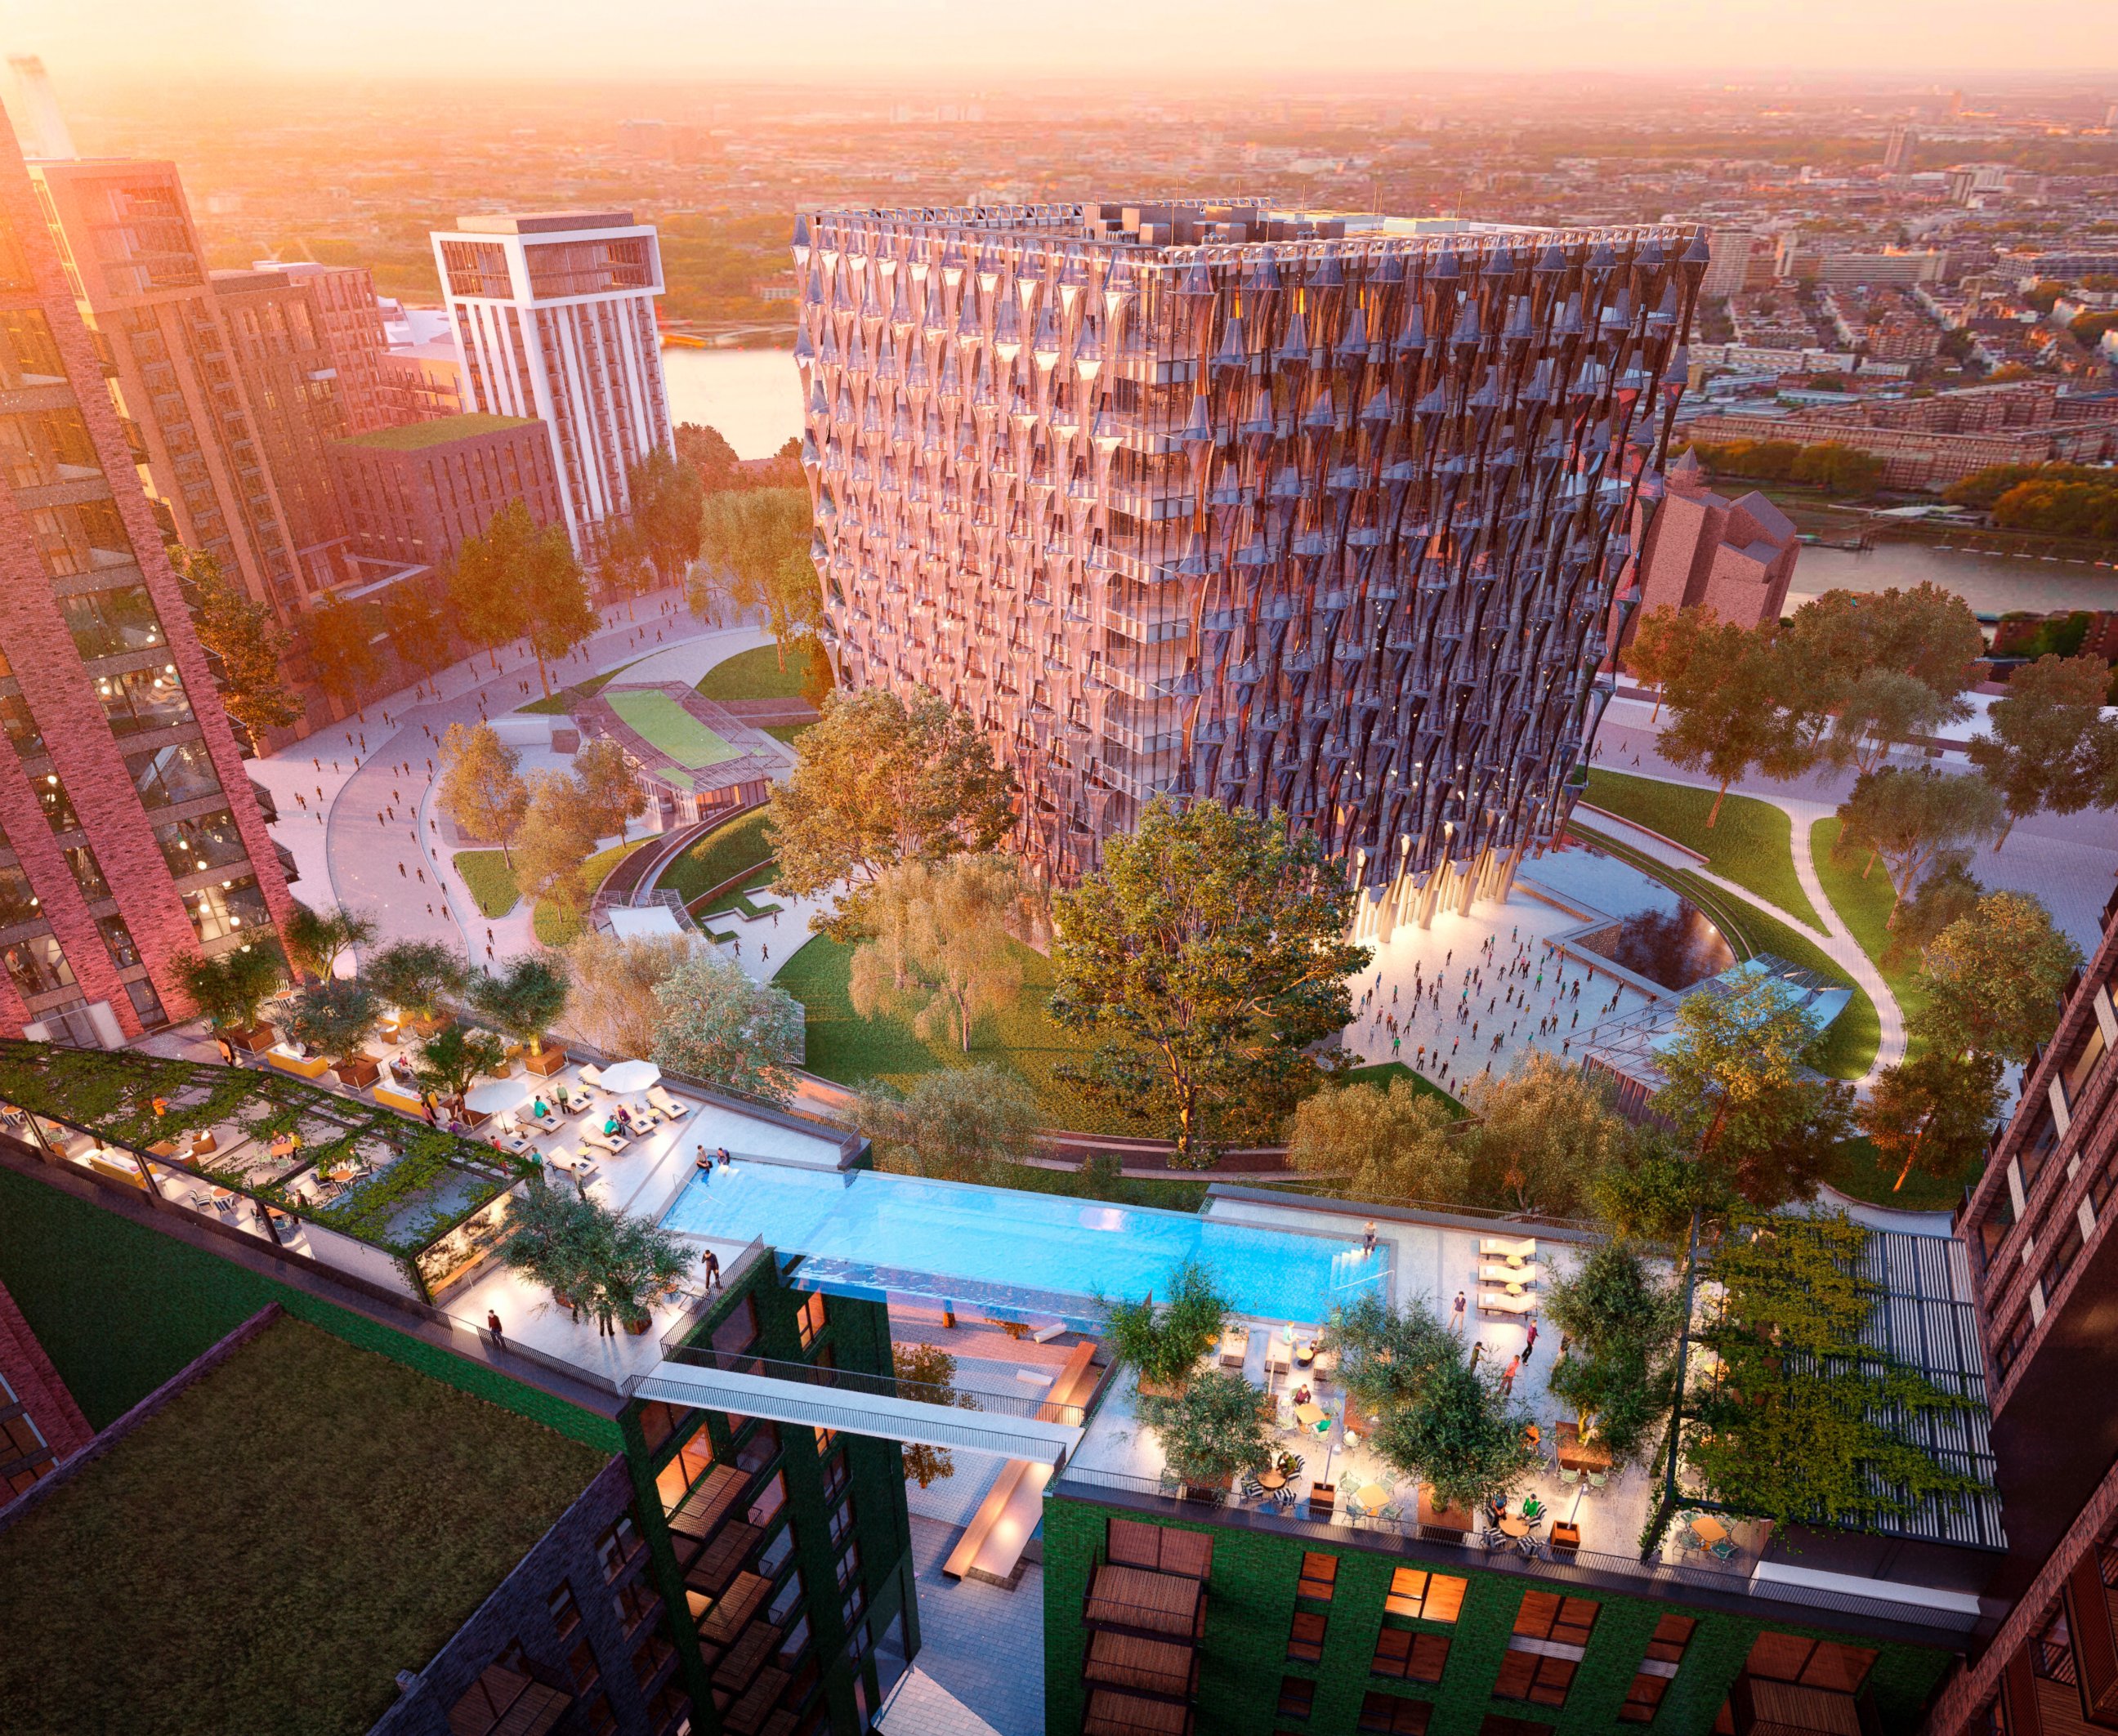 PHOTO: Plans for a suspended swimming pool named 'Sky Pool' have been unveiled for Embassy Gardens - the residential heart of London's newest neighborhood, Nine Elms on the South Bank.  